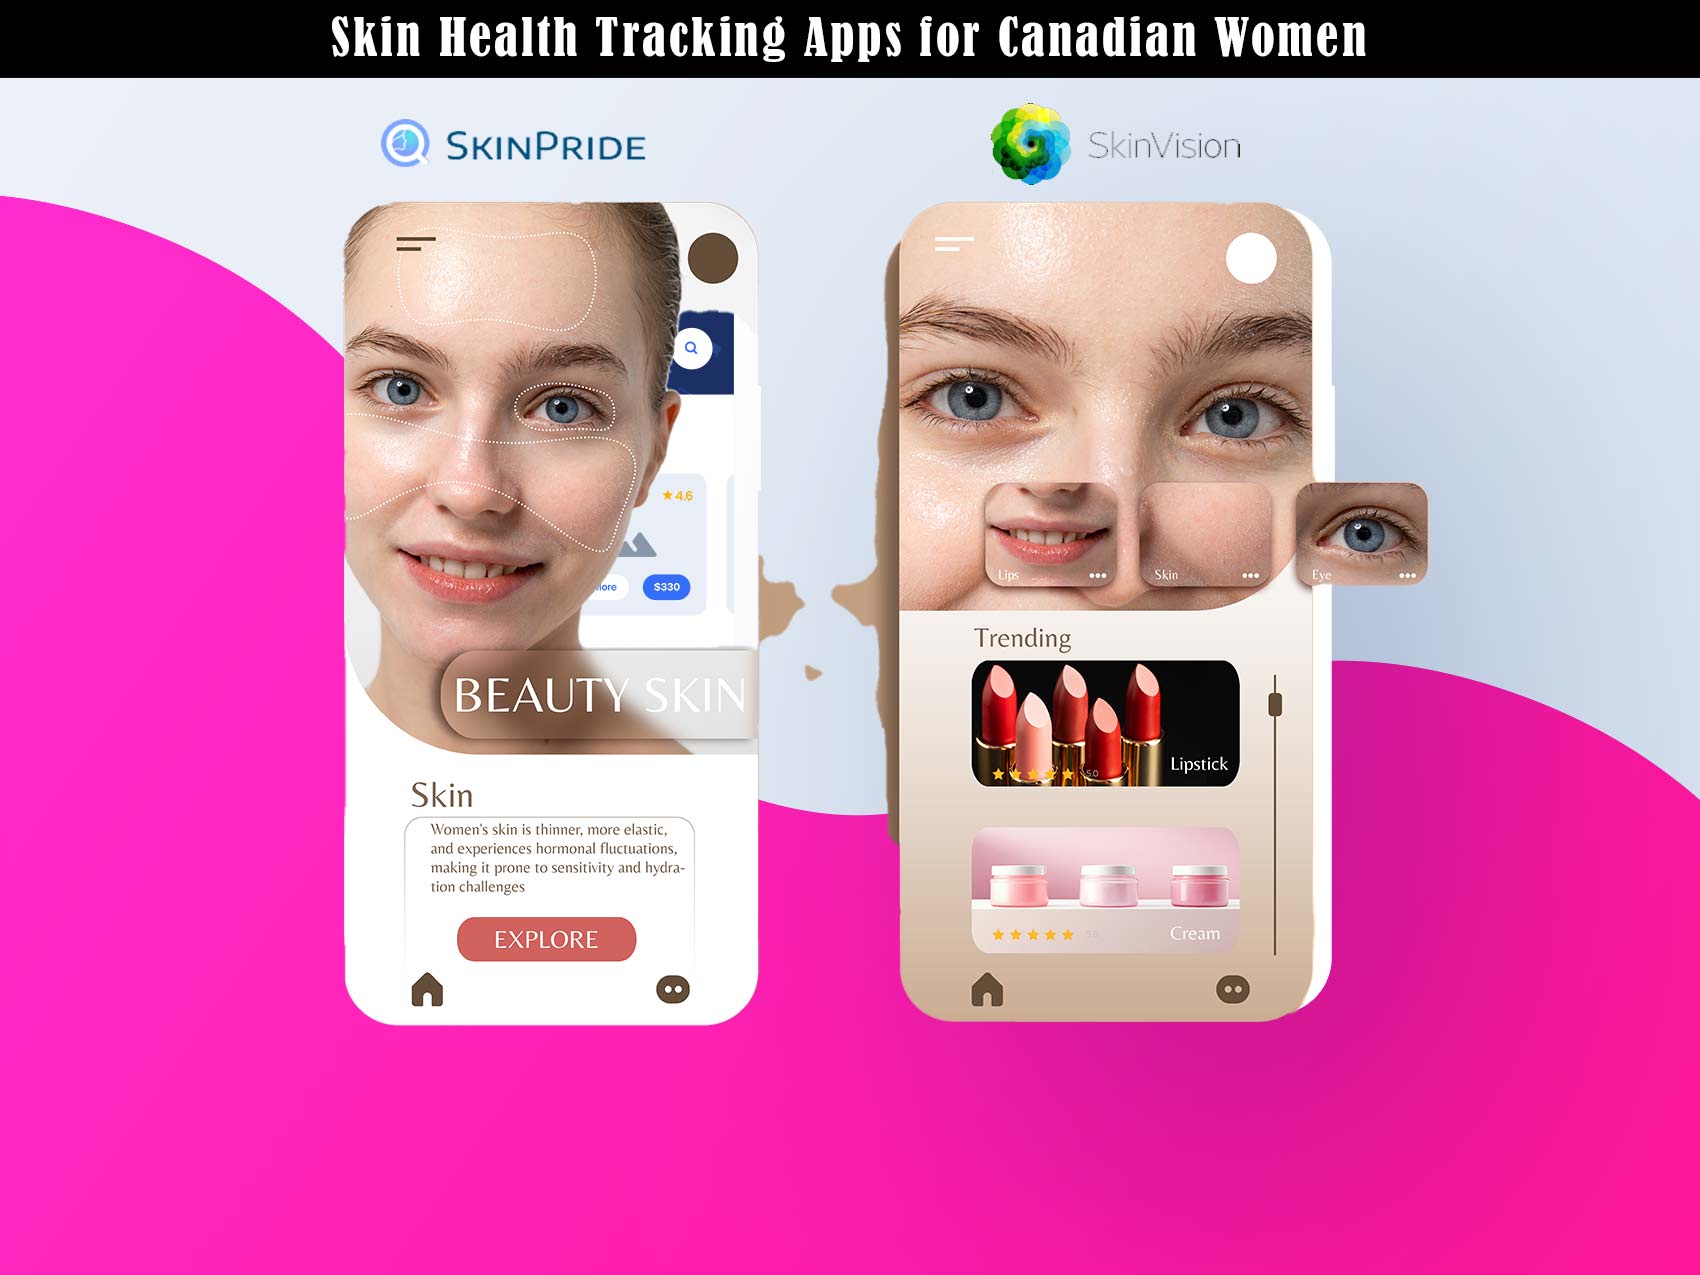 Discover top-rated skin health tracking apps tailored for Canadian women, offering personalized solutions for flawless skin. SkinPride